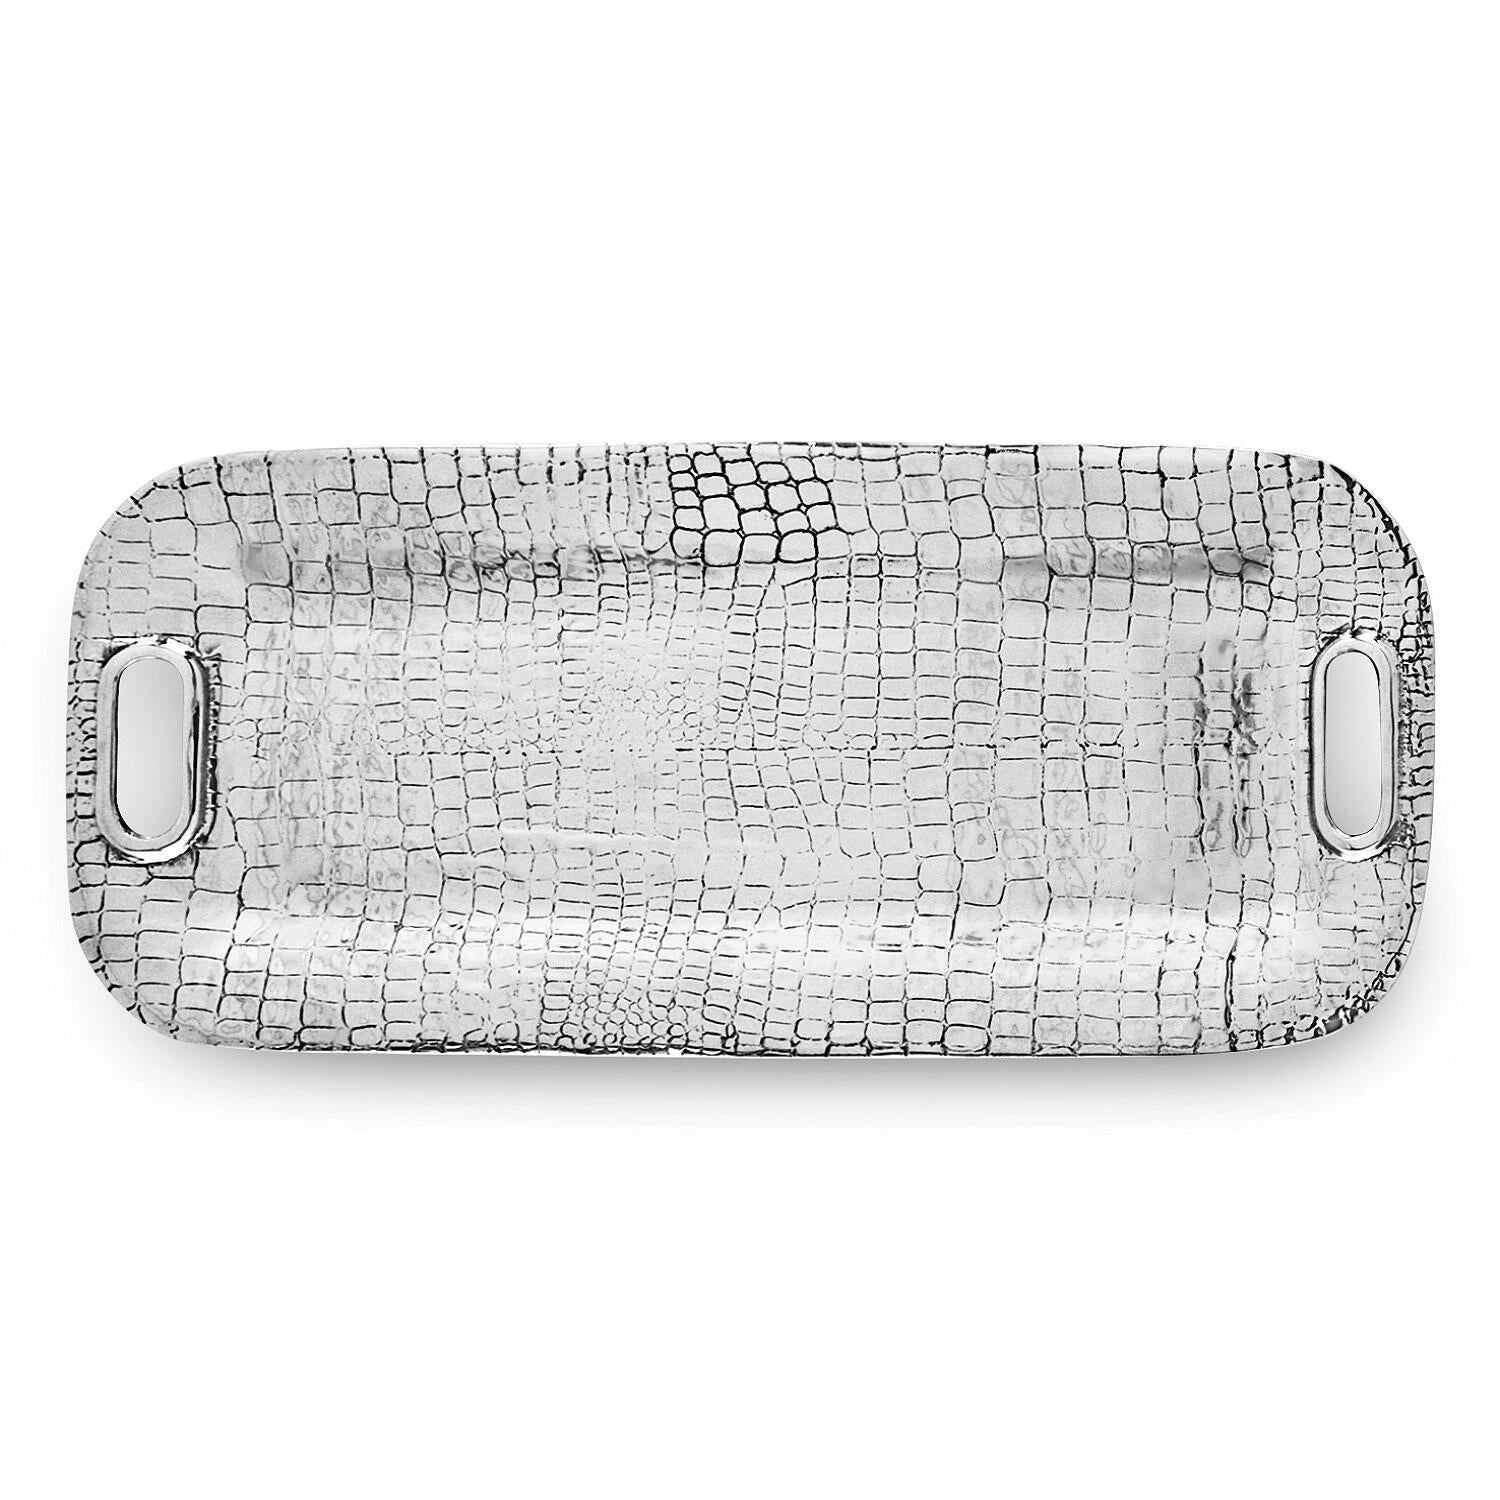 PIELES Croc Long Rectangular Tray with Handles